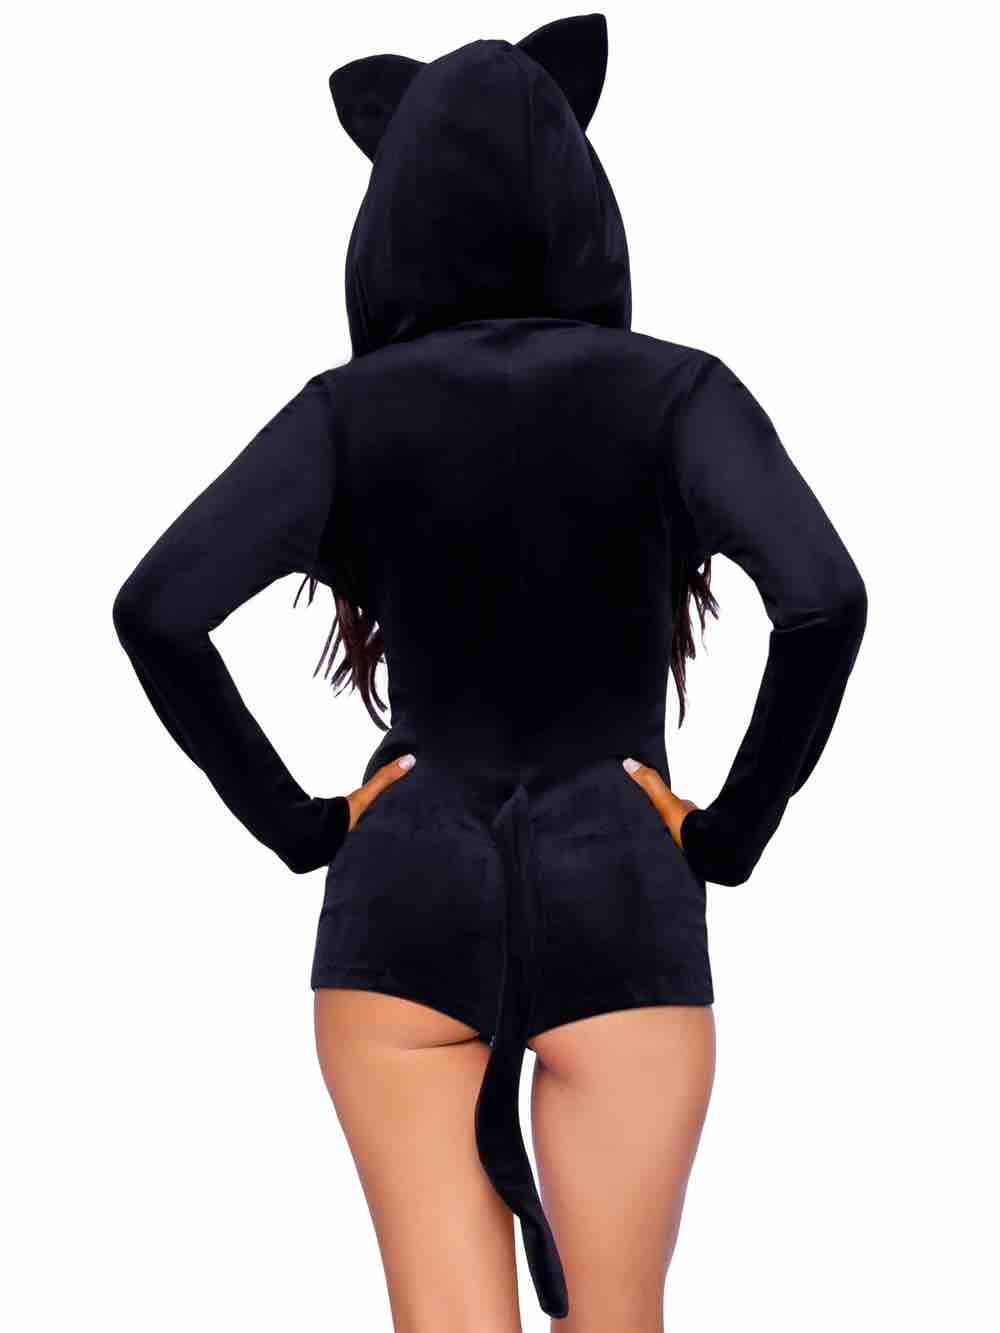 The Comfy Cat Onesie, on a model, rear view.